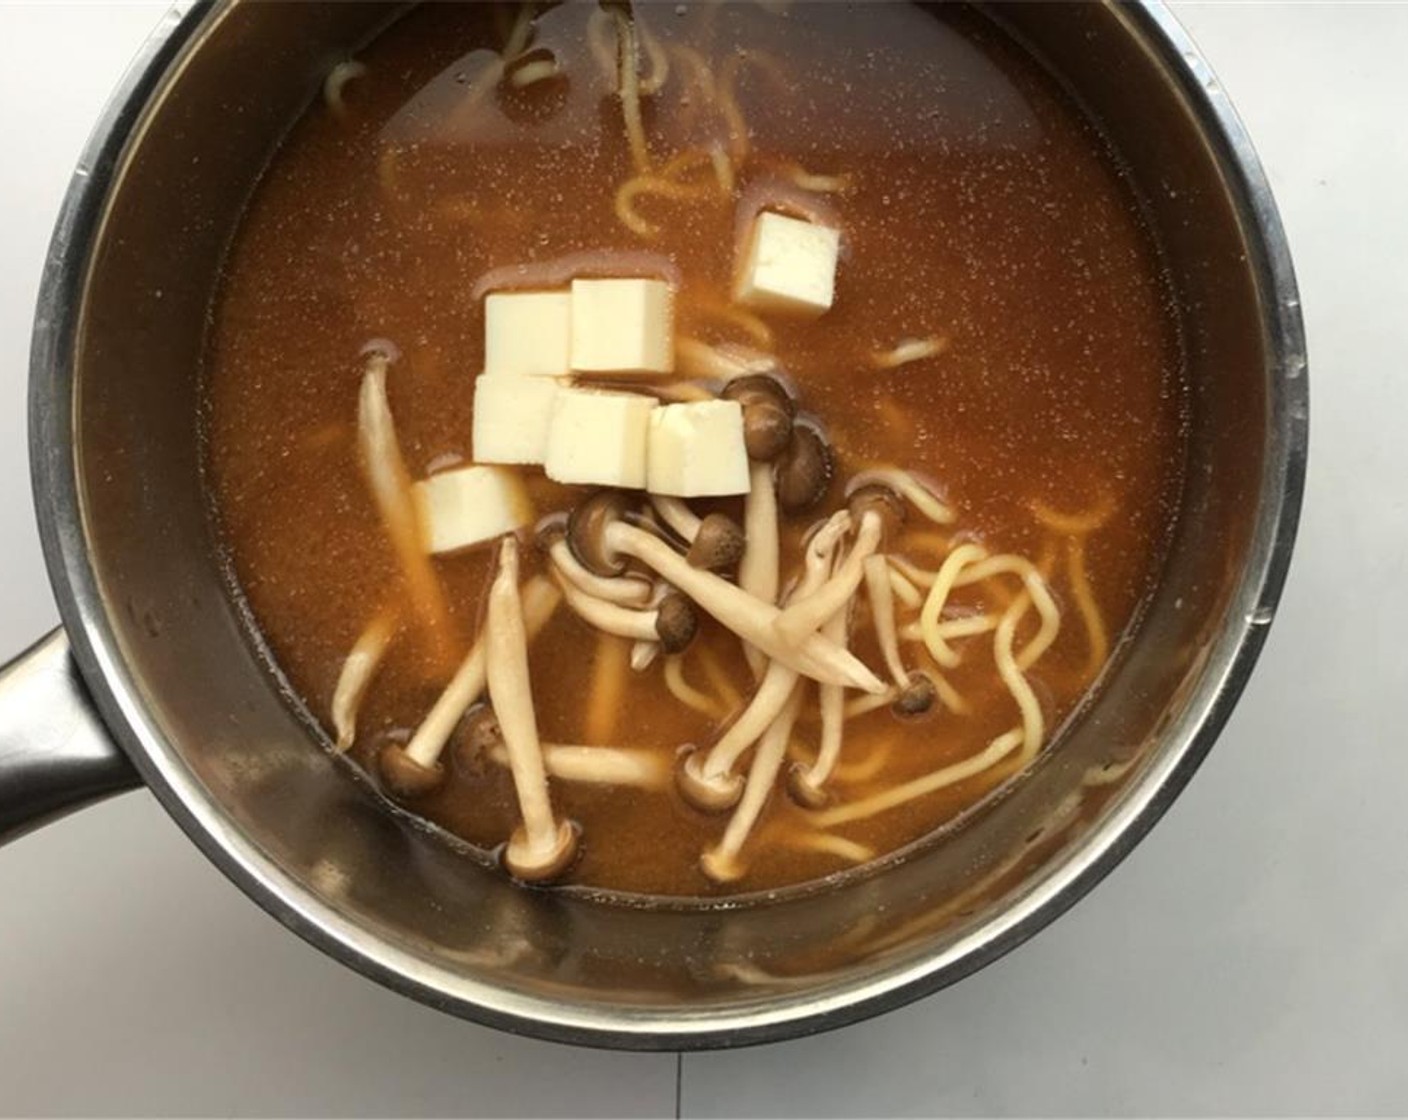 step 6 Let them soak in the miso soup for a couple of minutes until they fall apart. Then add the Tofu (2 oz) and the Mushroom (1 handful) (depending on which mushrooms you are using, slice them up if necessary). Season with some Ground Black Pepper (to taste).